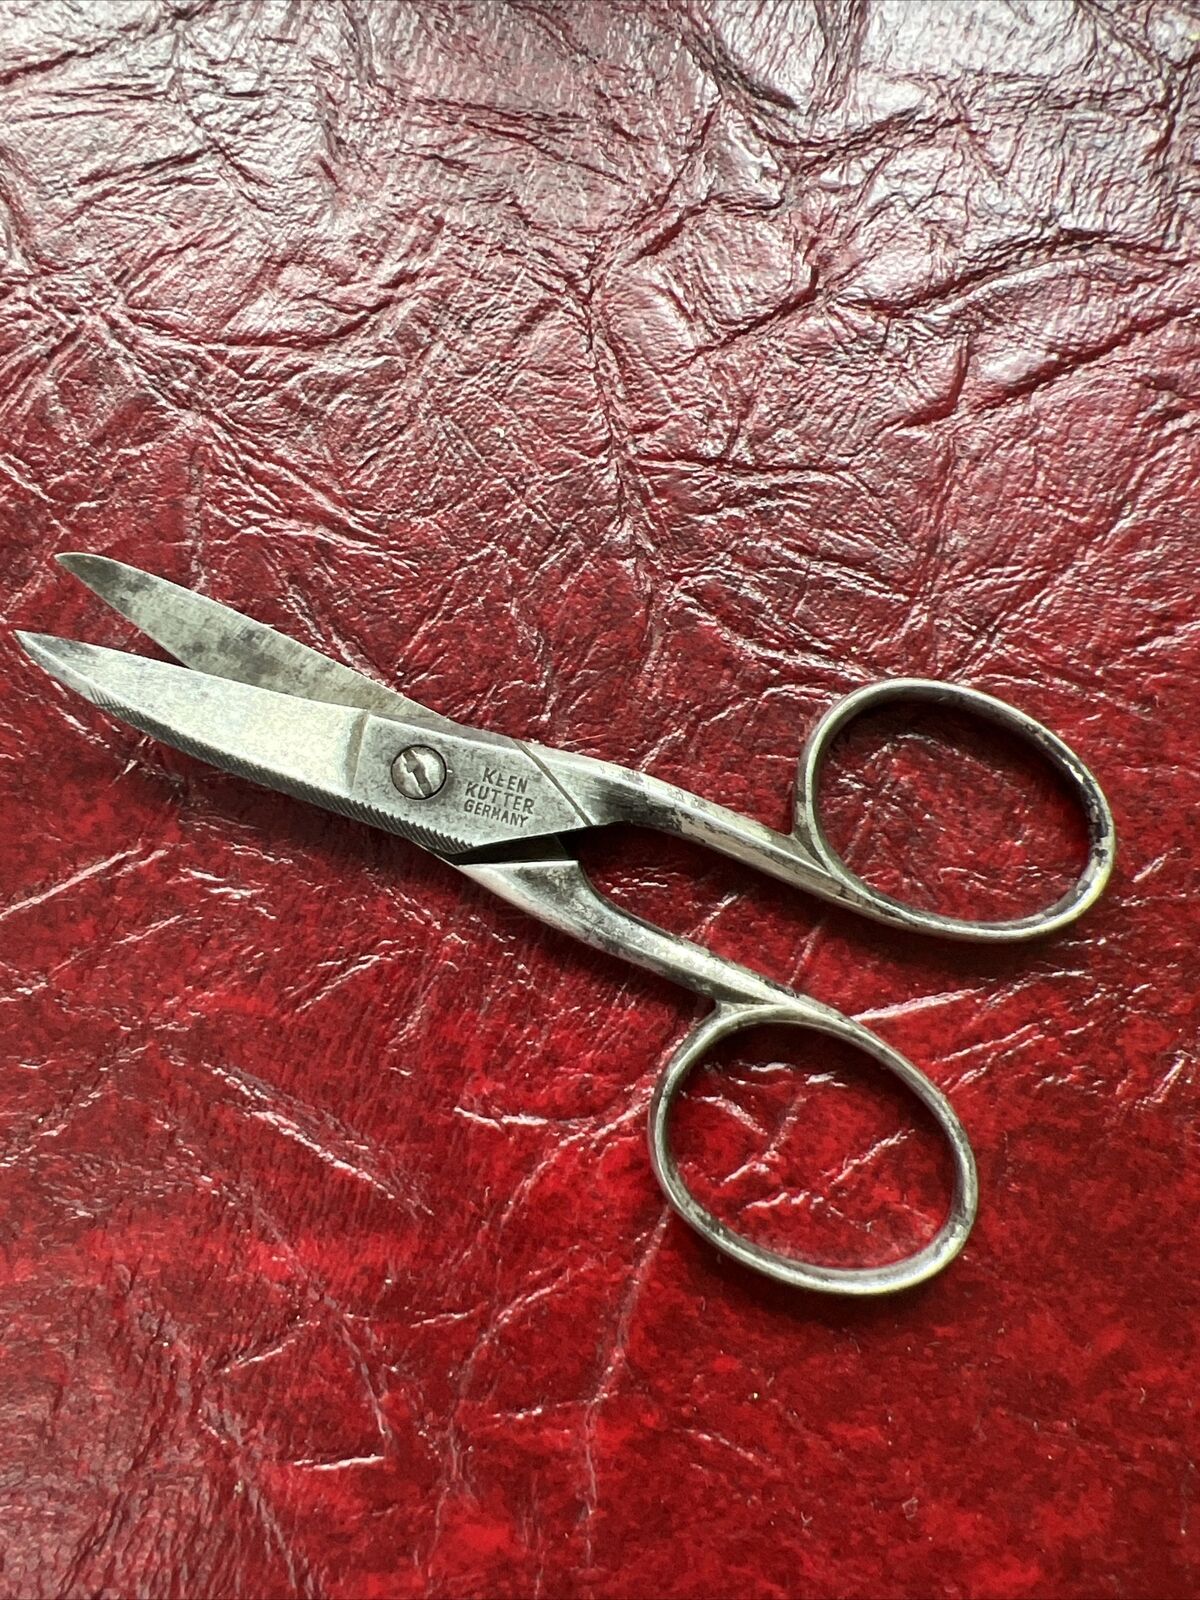 Antique Keen Kutter 4 Inch Curved Blade Scissors Made In Germany Unique Knurling